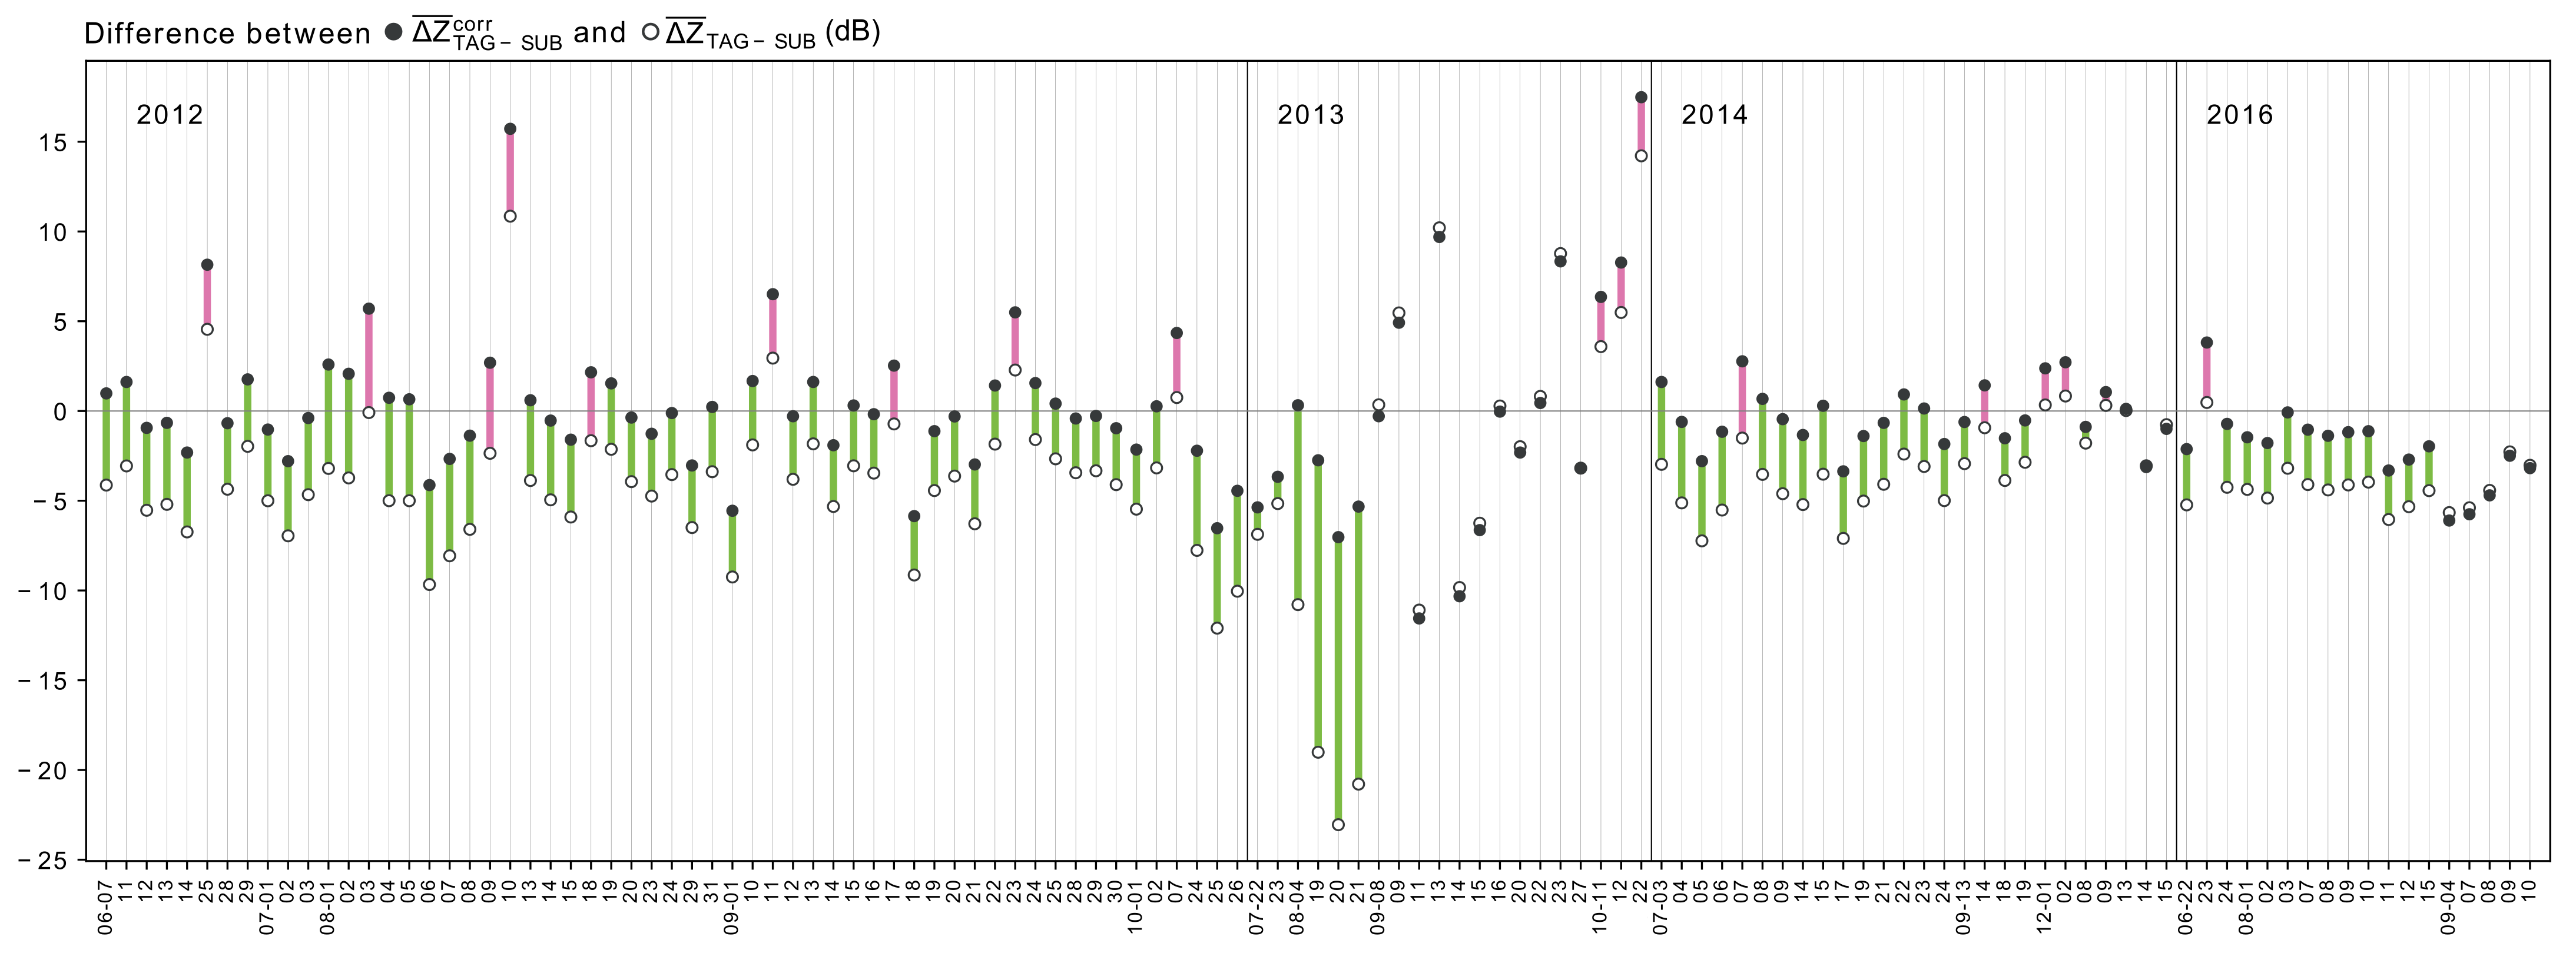 The differences between the inter-radar consistency before and after correcting for the ground radar calibration biases following a rolling window averaging for samples with significant number of matches. The hollow (filled) circles represent the daily mean before (after) correction. The line color represents an improvement (green) or a decline (pink) in the consistency between the two ground radars.